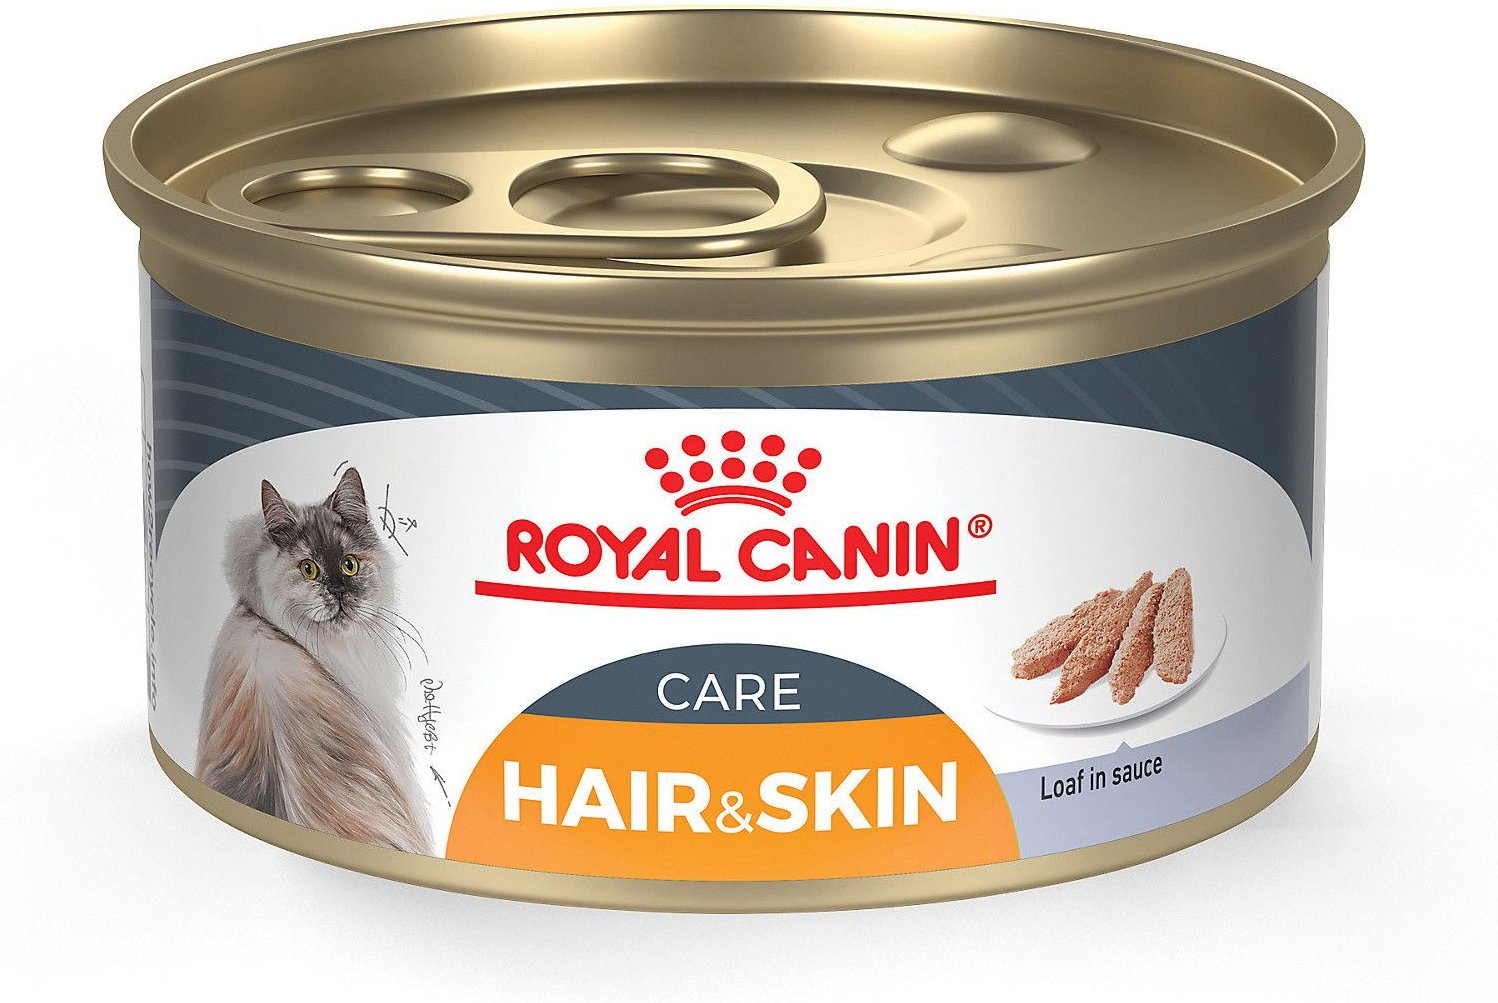 ROYAL CANIN Intense Beauty Loaf in Sauce Canned Cat Food, 3oz, case of